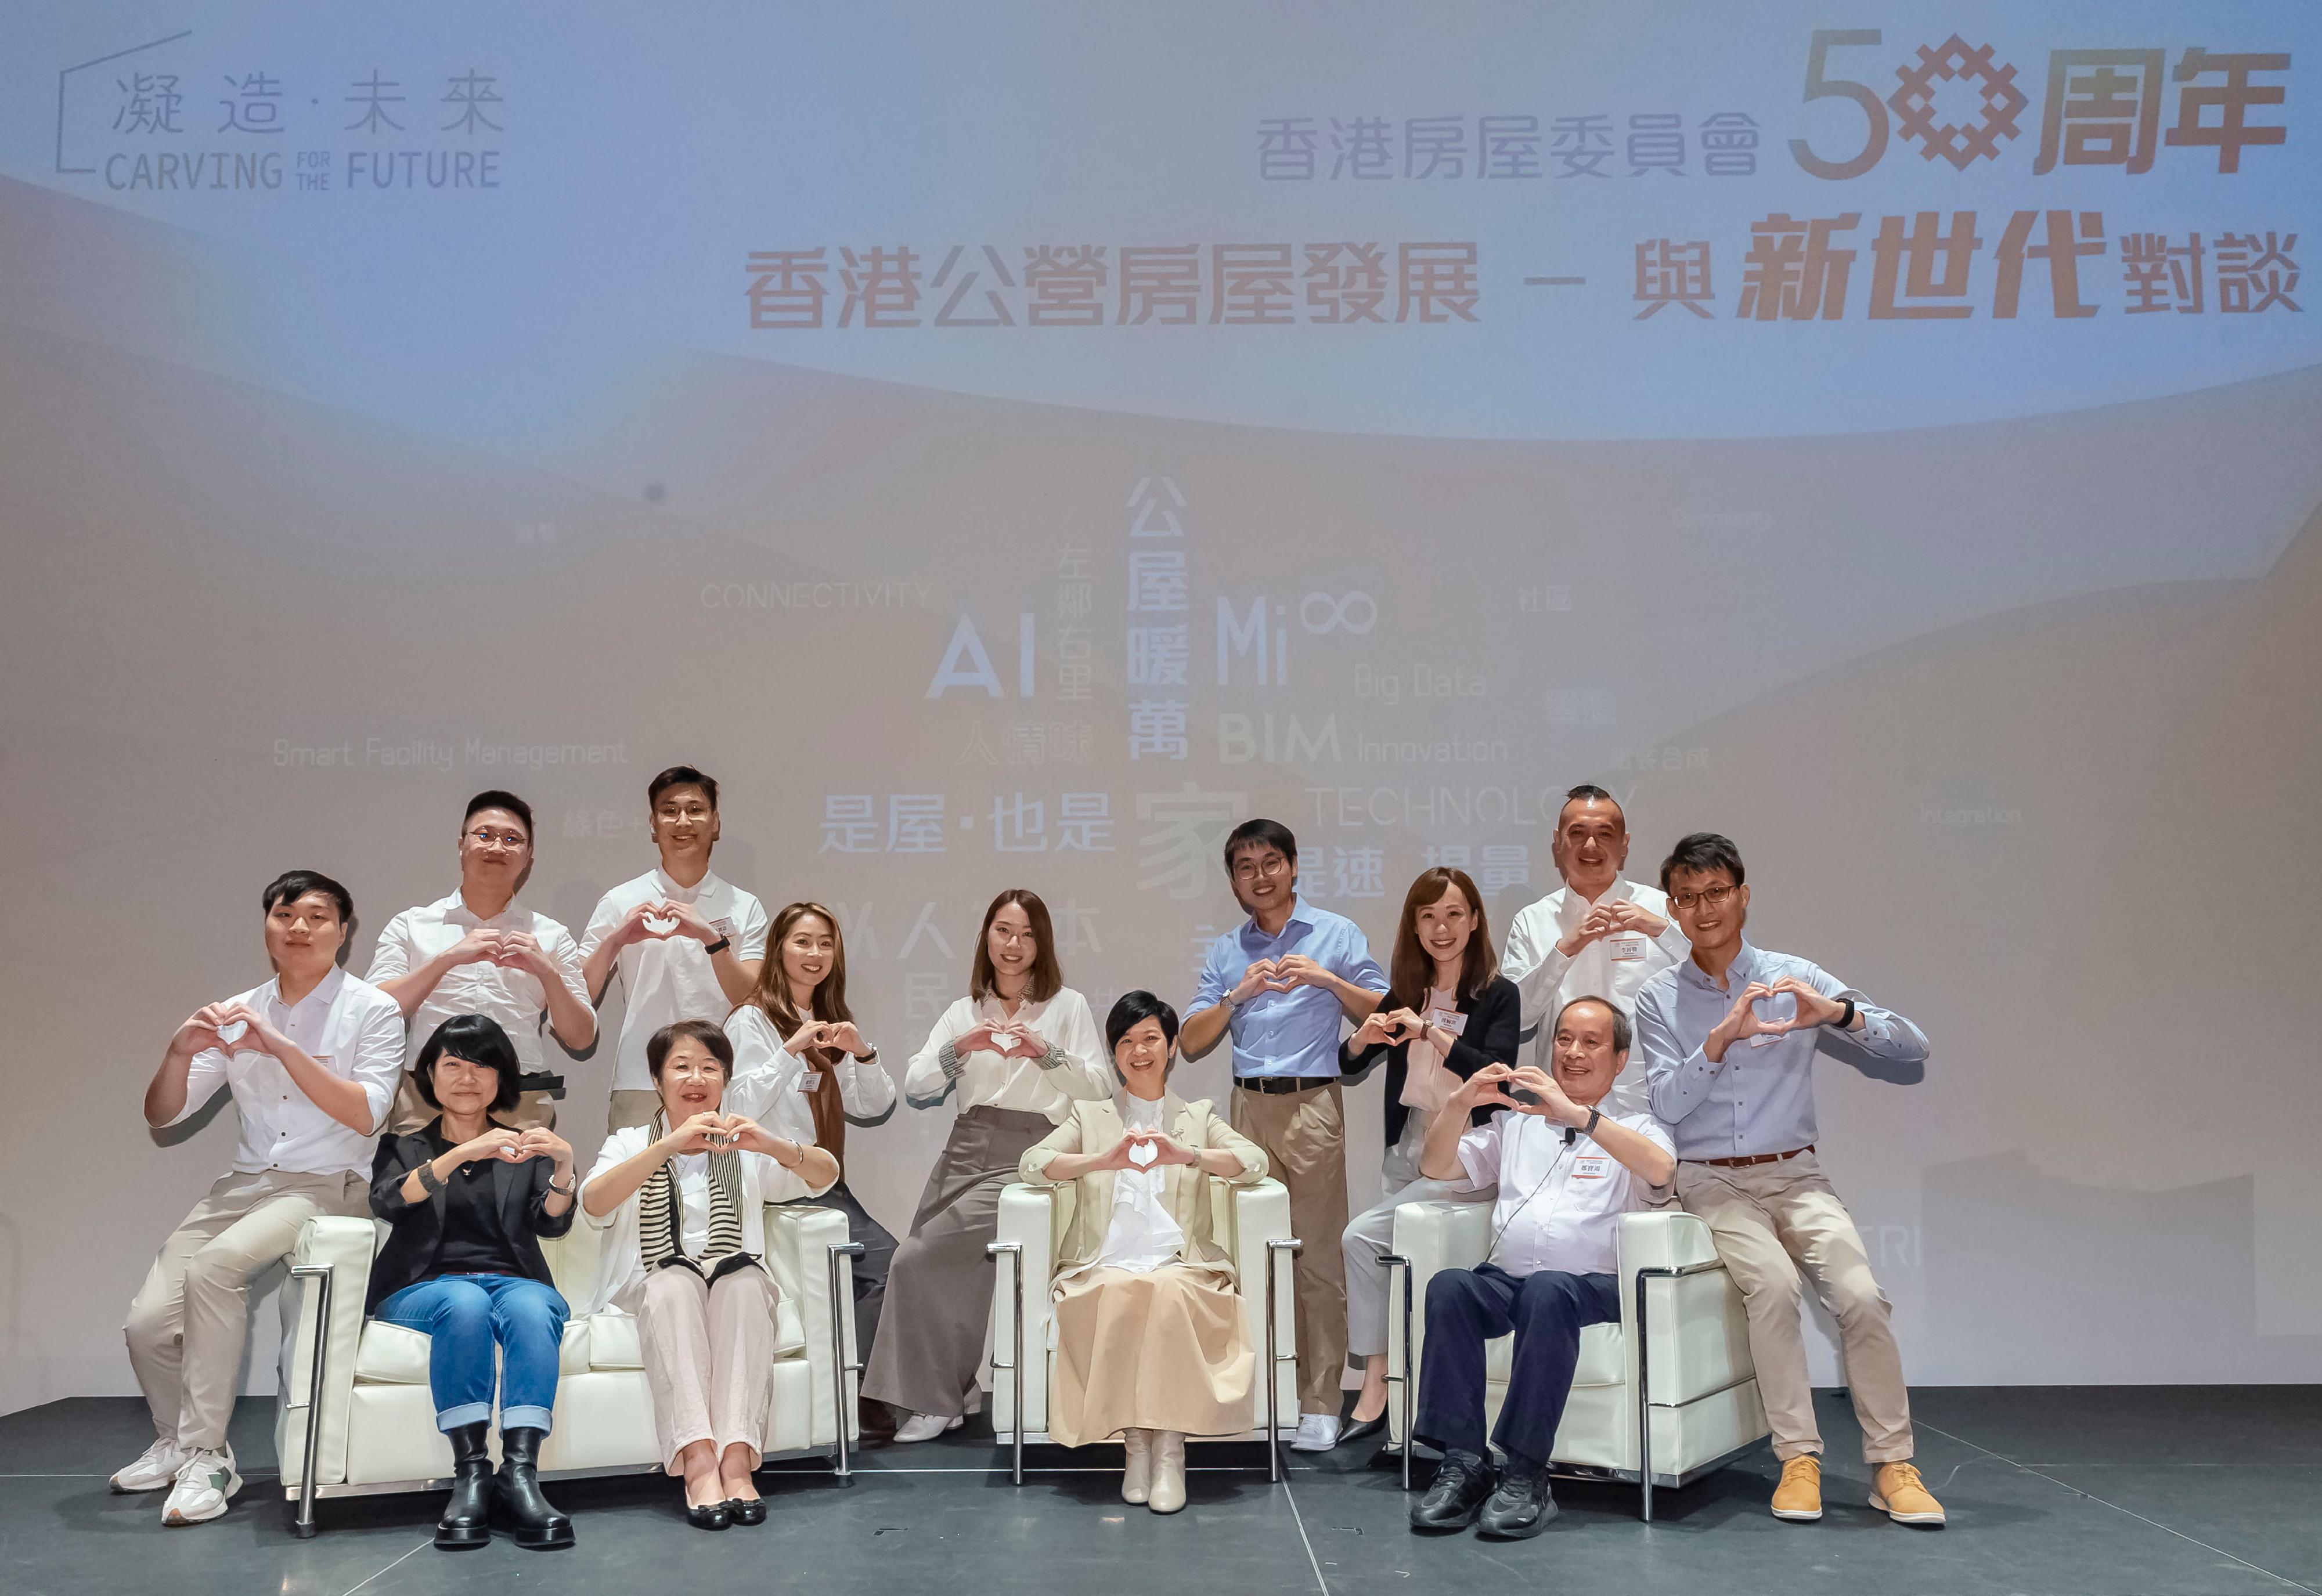 The Secretary for Housing, Ms Winnie Ho (front row, second right); Former Deputy Director of Housing (Development and Construction) and former President of the Hong Kong Institute of Architects, Ms Ada Fung (front row, second left); and renowned Hong Kong history expert Mr Cheng Po-hung (front row, first left) are pictured with young professionals participating in a forum titled "Evolution of Public Housing in Hong Kong - Dialogue with the New Generation" organised by the Hong Kong Housing Authority.